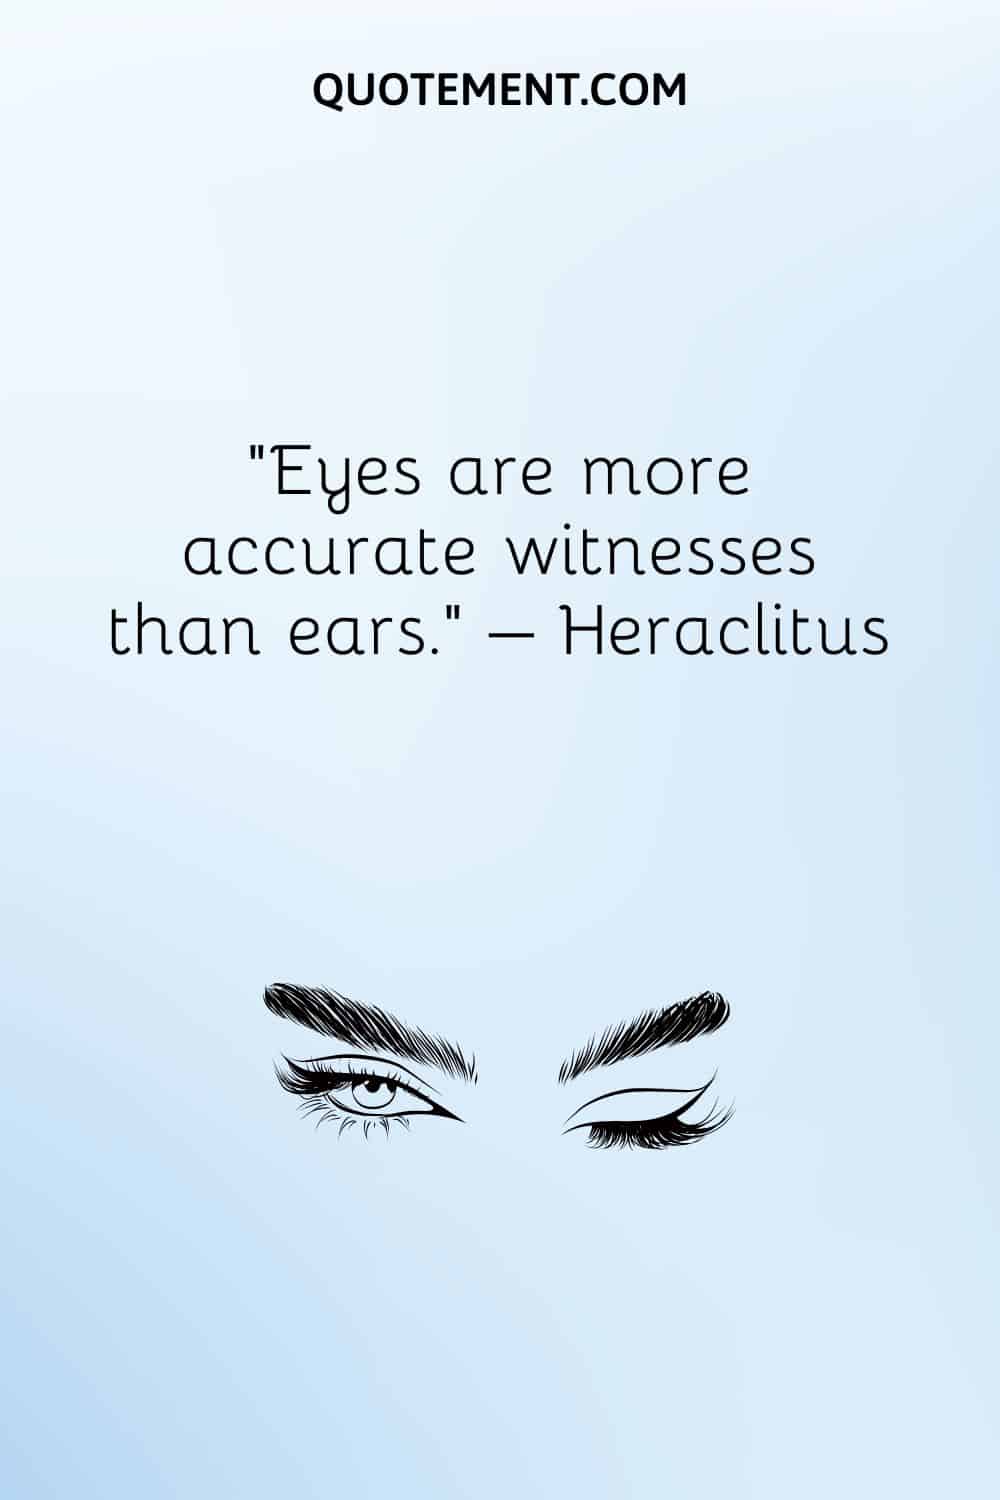 Eyes are more accurate witnesses than ears